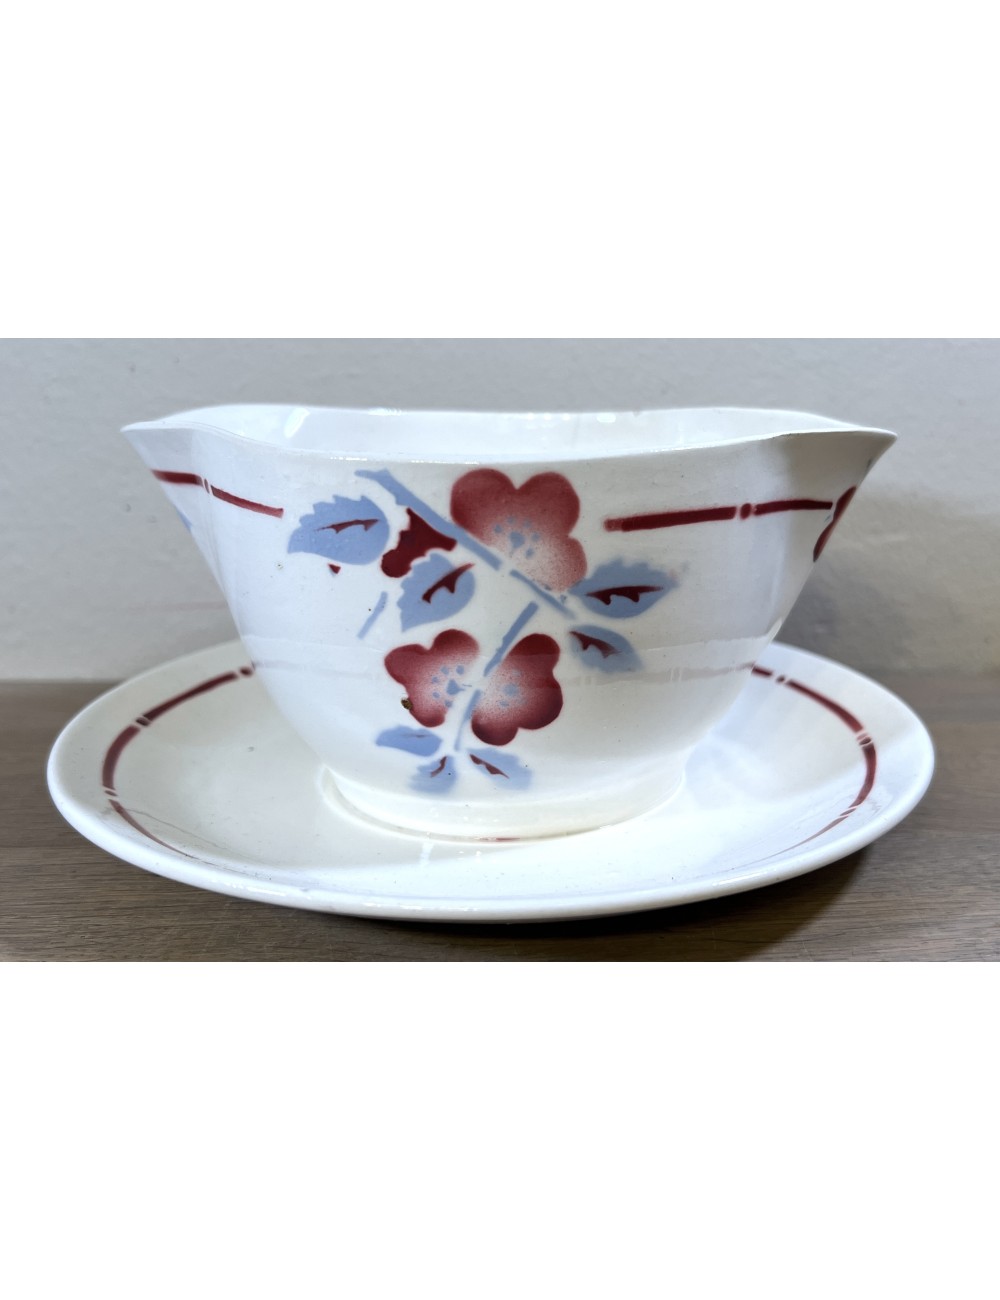 Gravy / Sauce Bowl - St. Amand Ceranord - décor with purple colored flowers and leaves